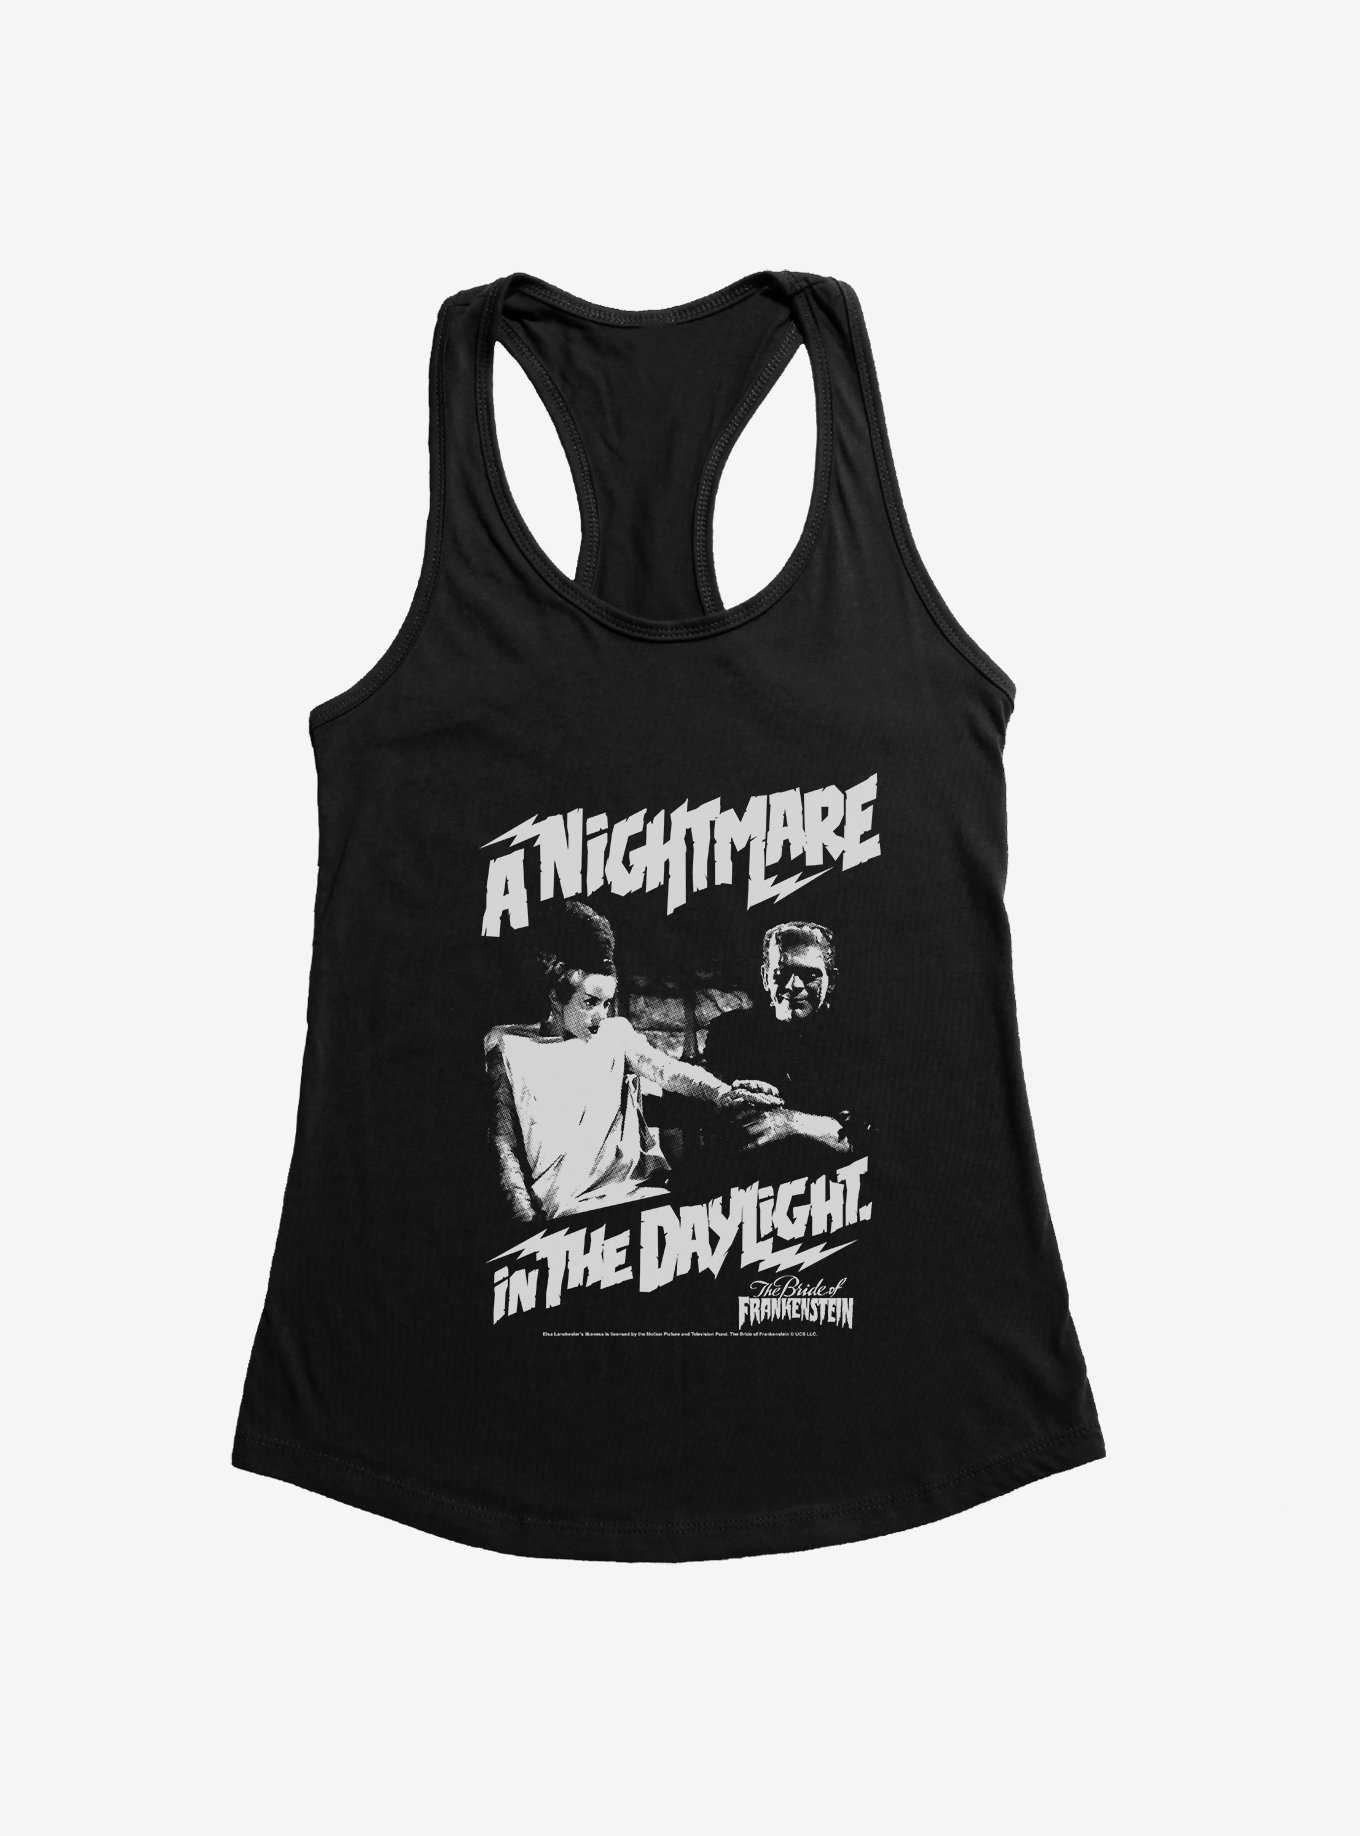 The Bride Of Frankenstein A Nightmare In The Daylight Girls Tank, , hi-res